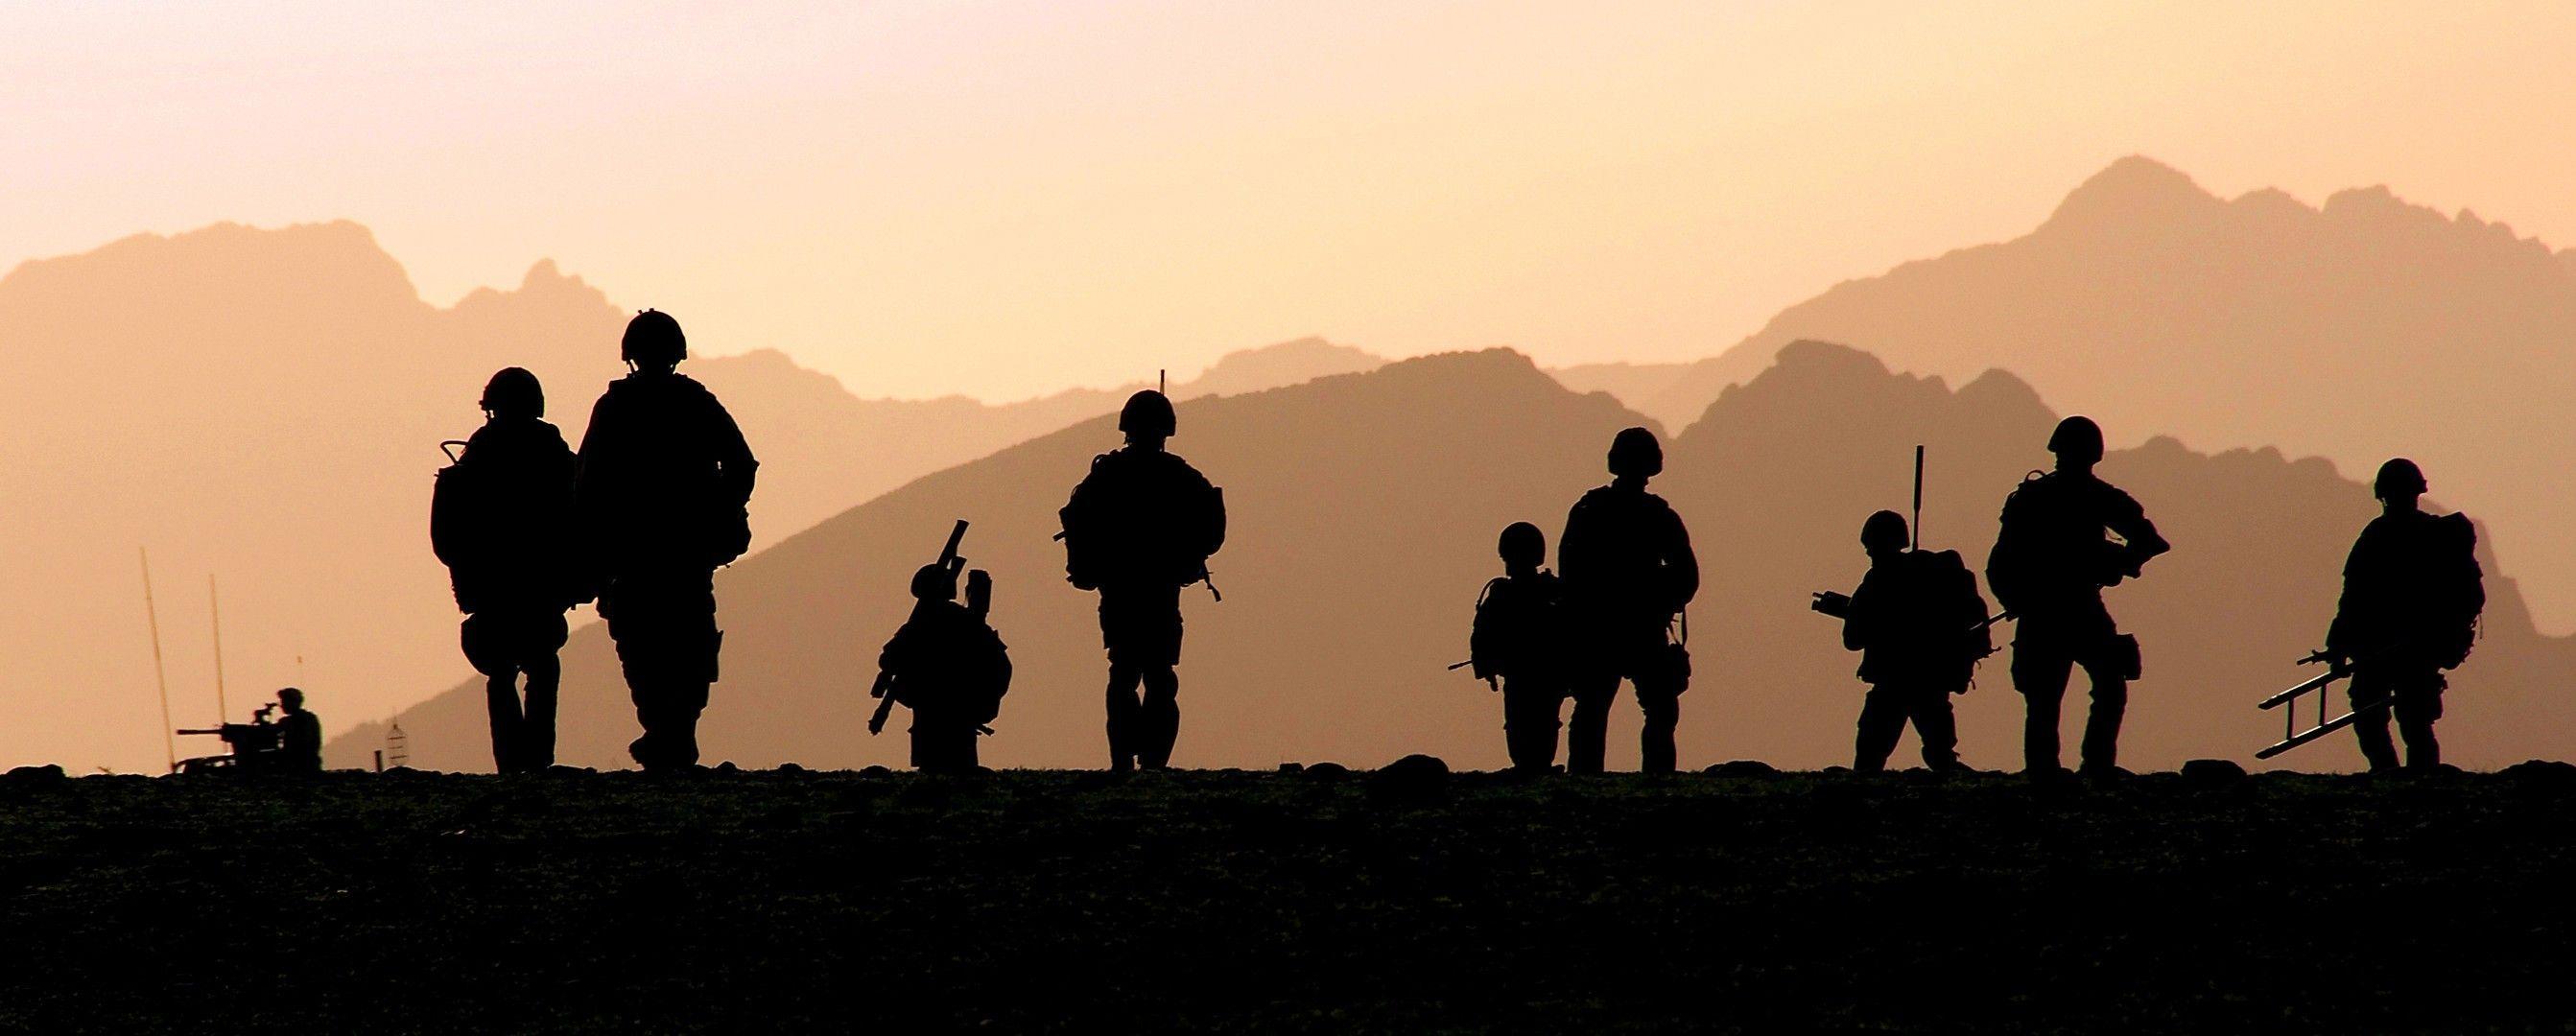 military, Silhouette, Royal Marines Wallpaper HD / Desktop and Mobile Background. Royal marines, Military, Soldier silhouette